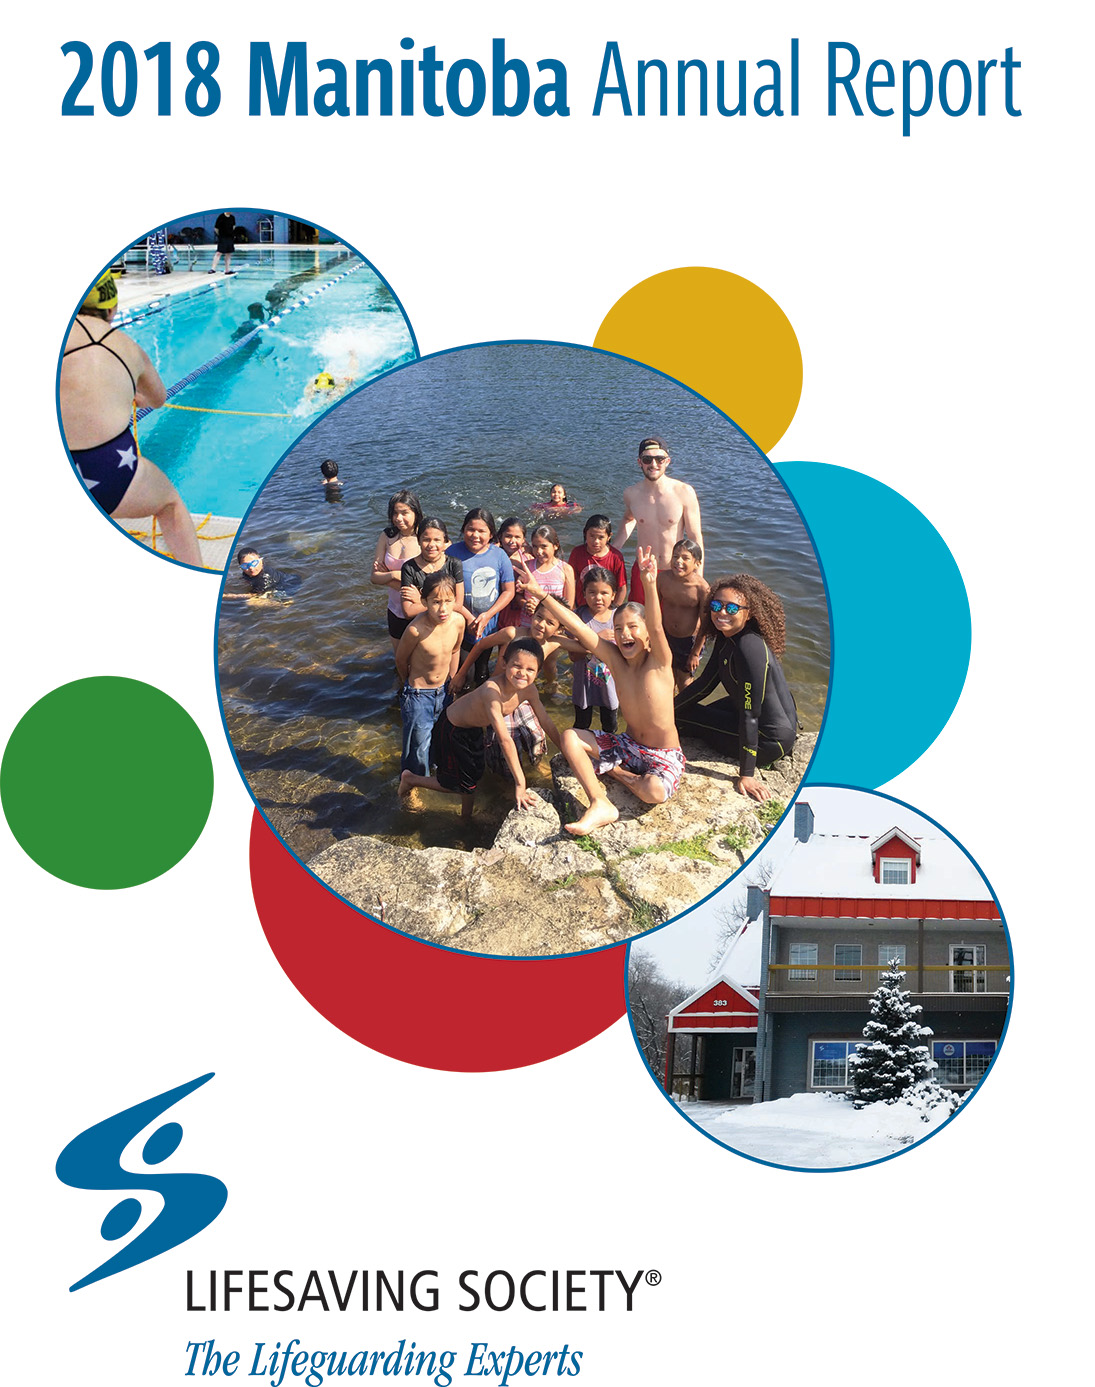 2018 Manitoba Annual Report cover - Assorted pictures in circles of people standing in front of a lake, or swimming in a pool with colourful circles in background of design